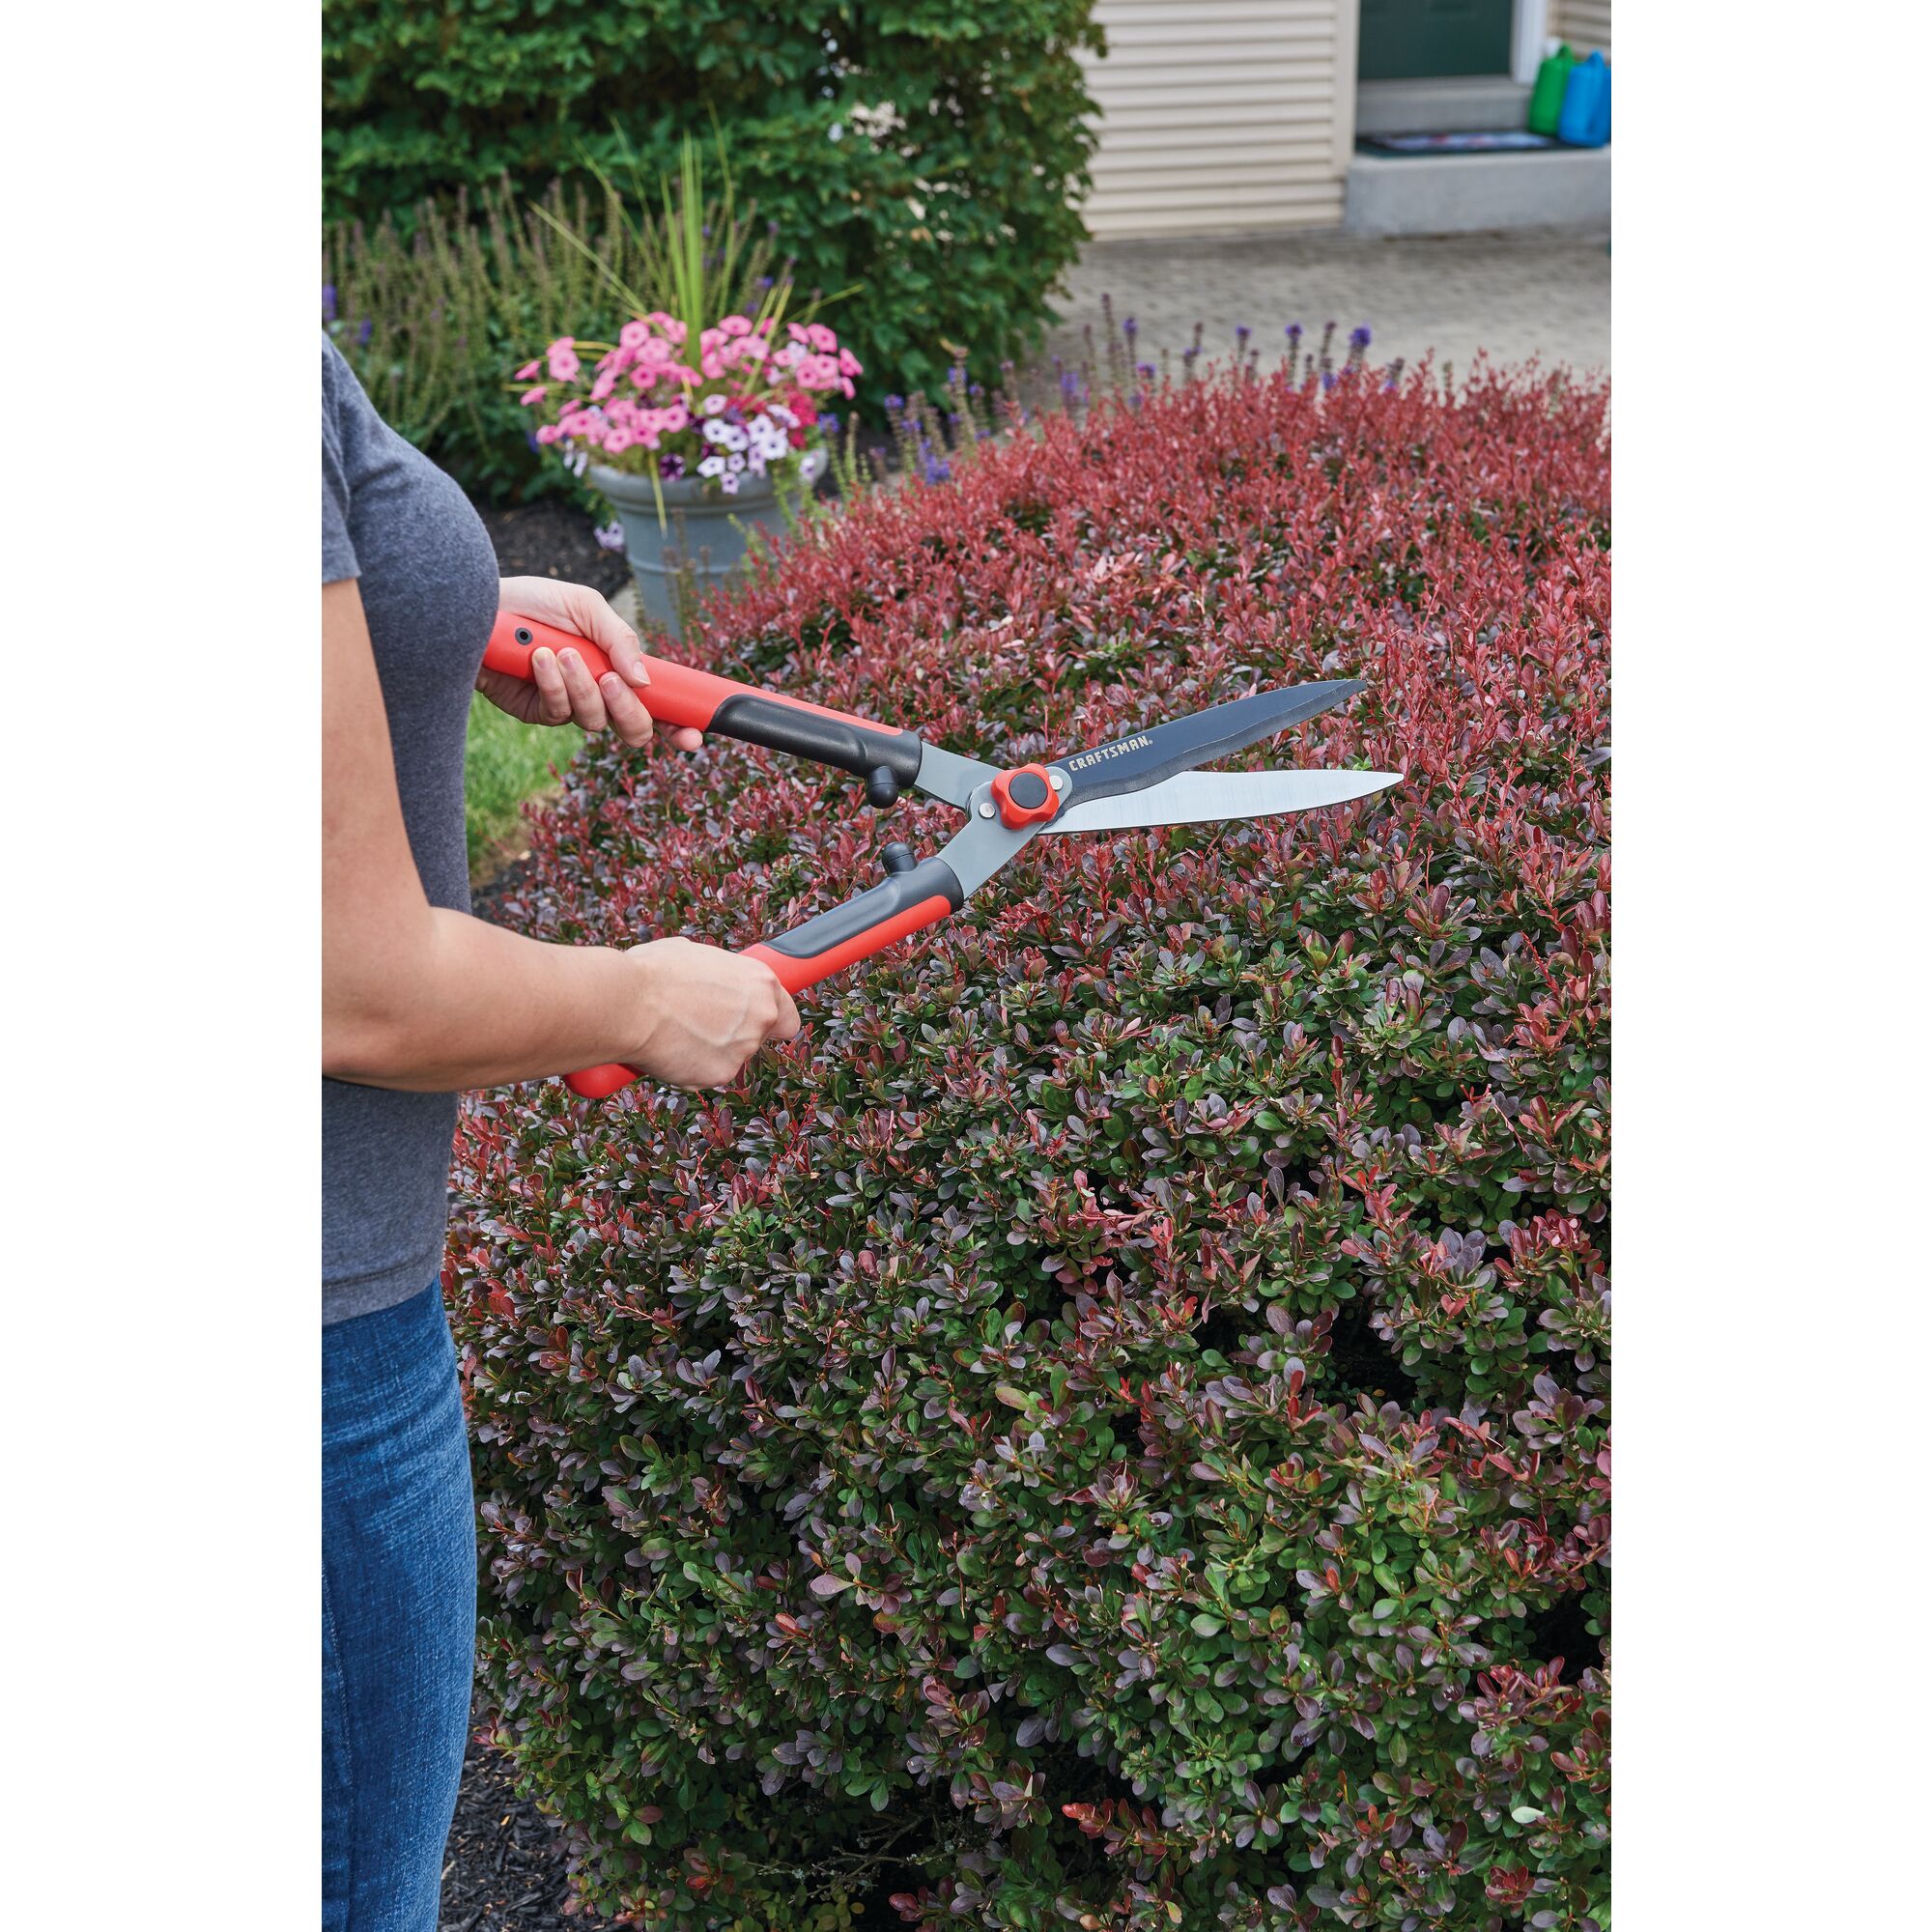 Hedge shears being used by a person to trim hedge.